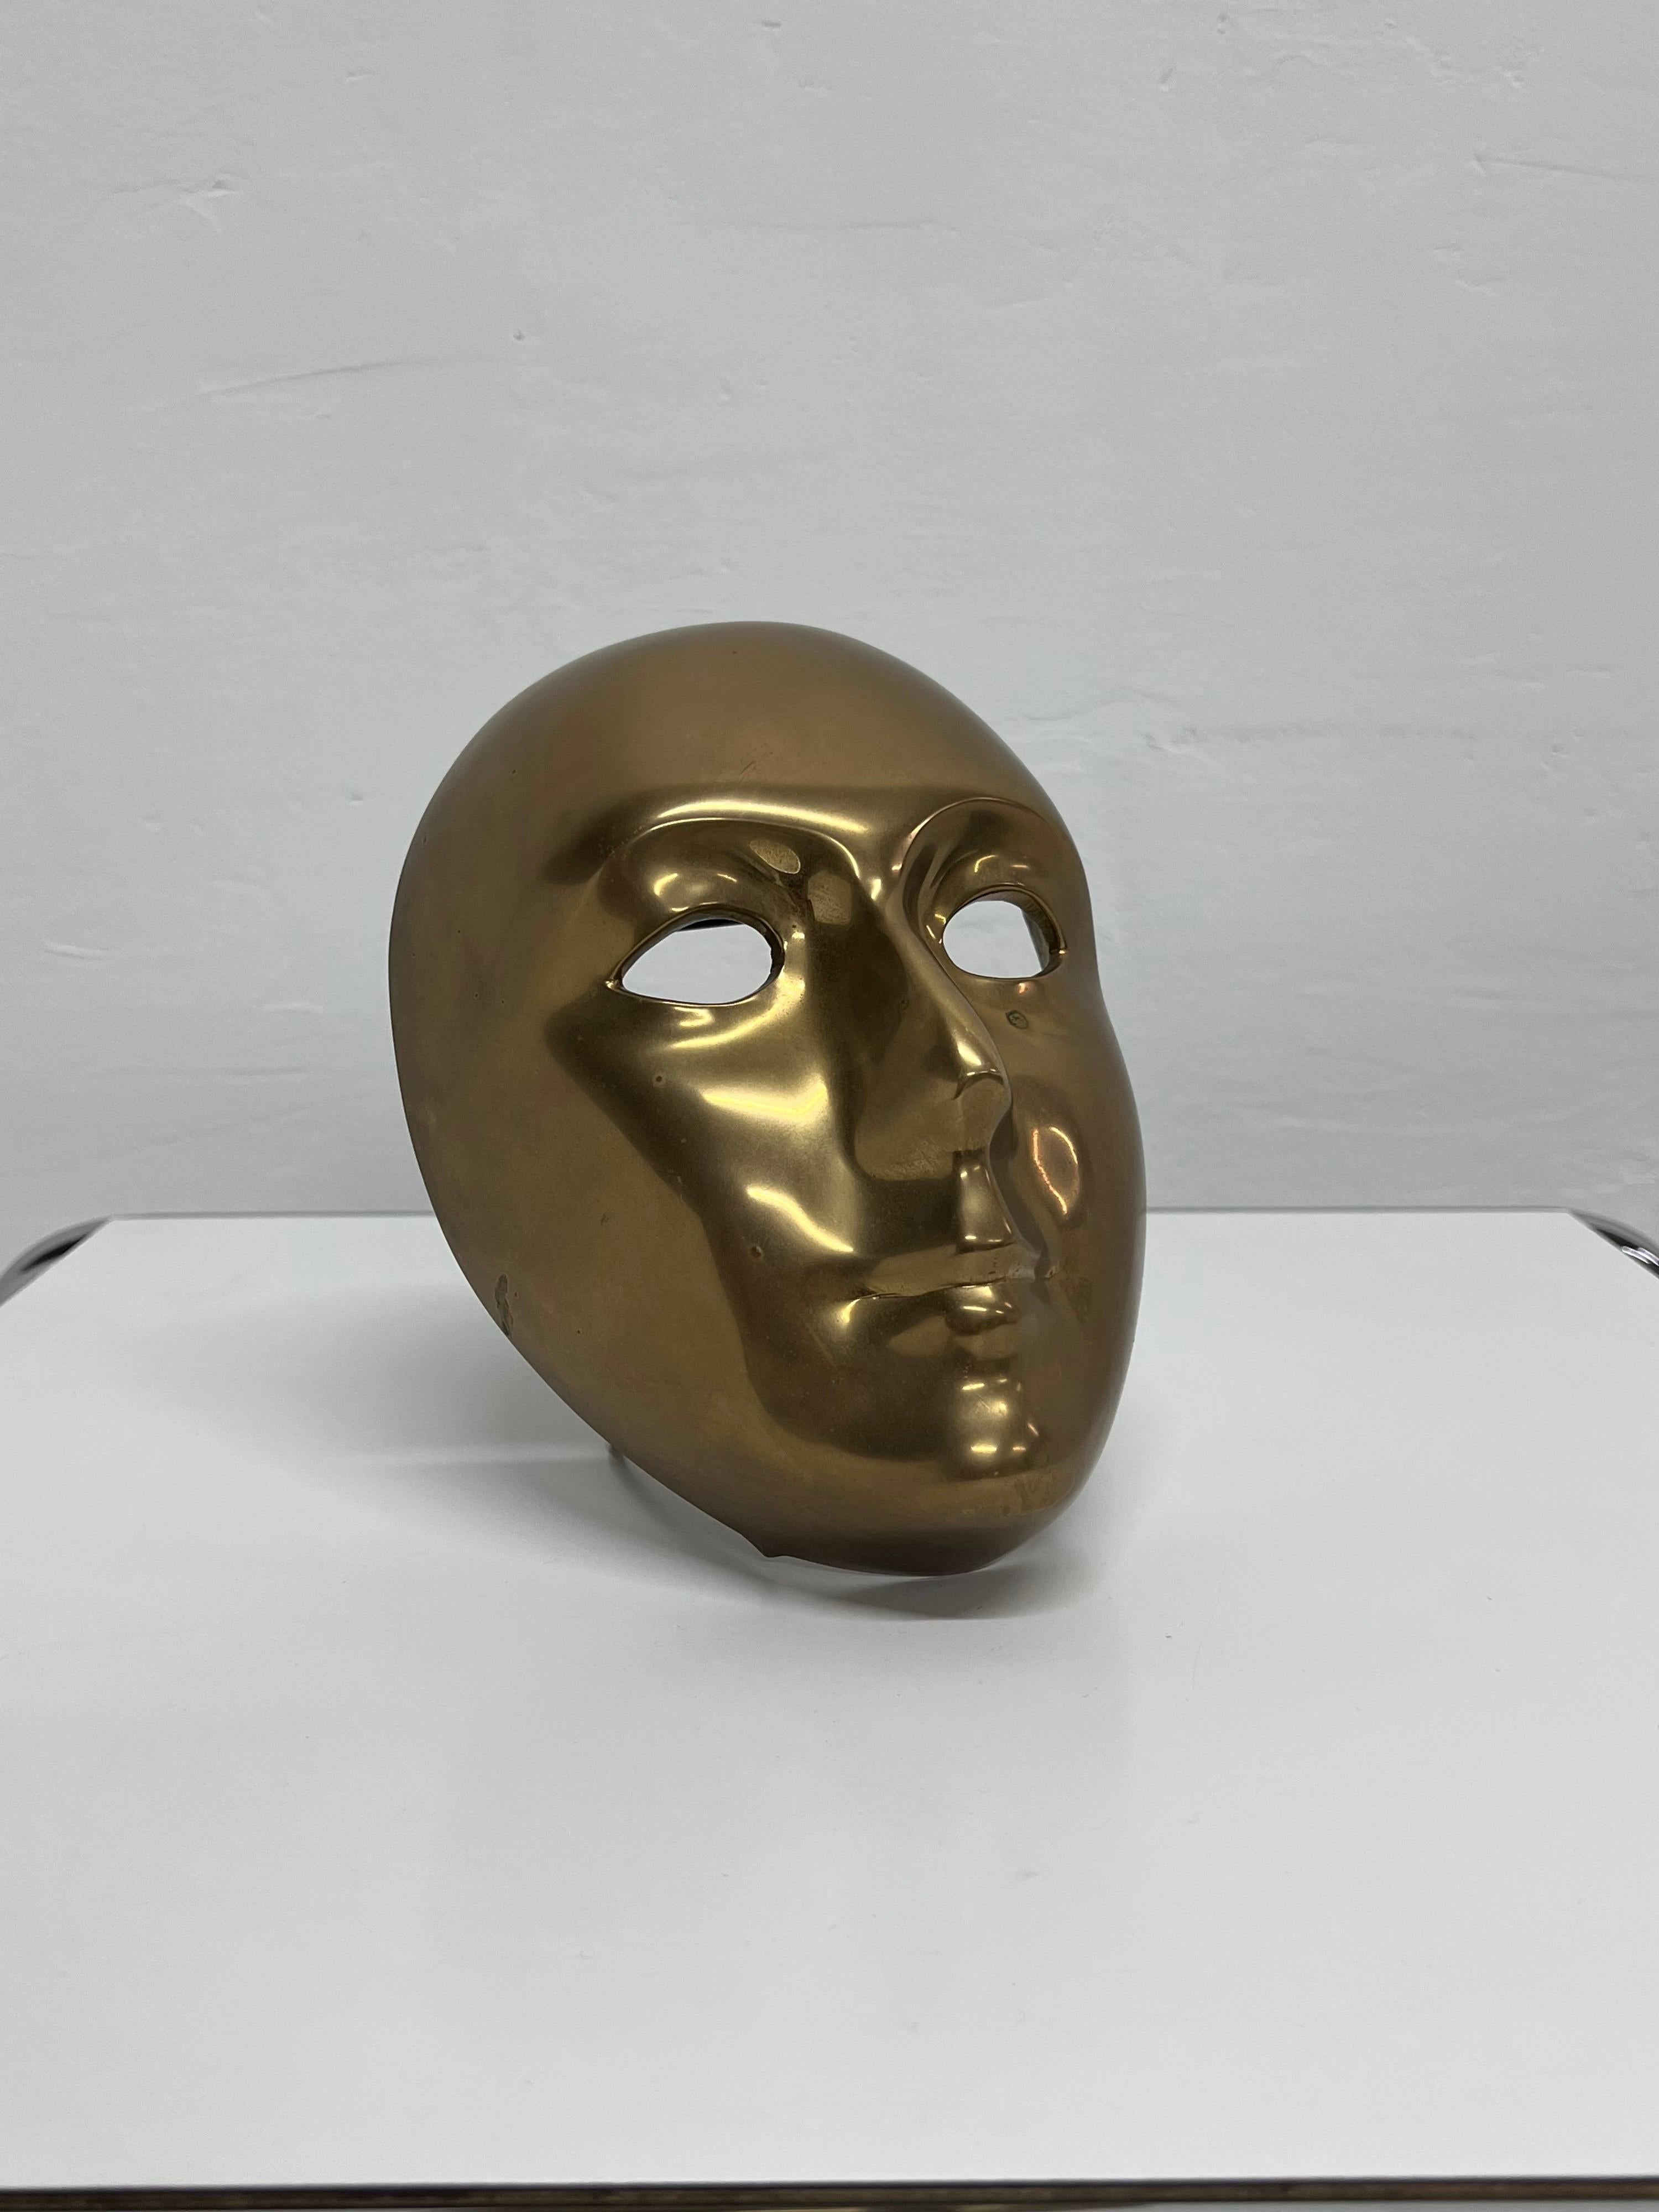 Polished Bronze Venetian Mask Sculpture by Volare, 1994 For Sale 5